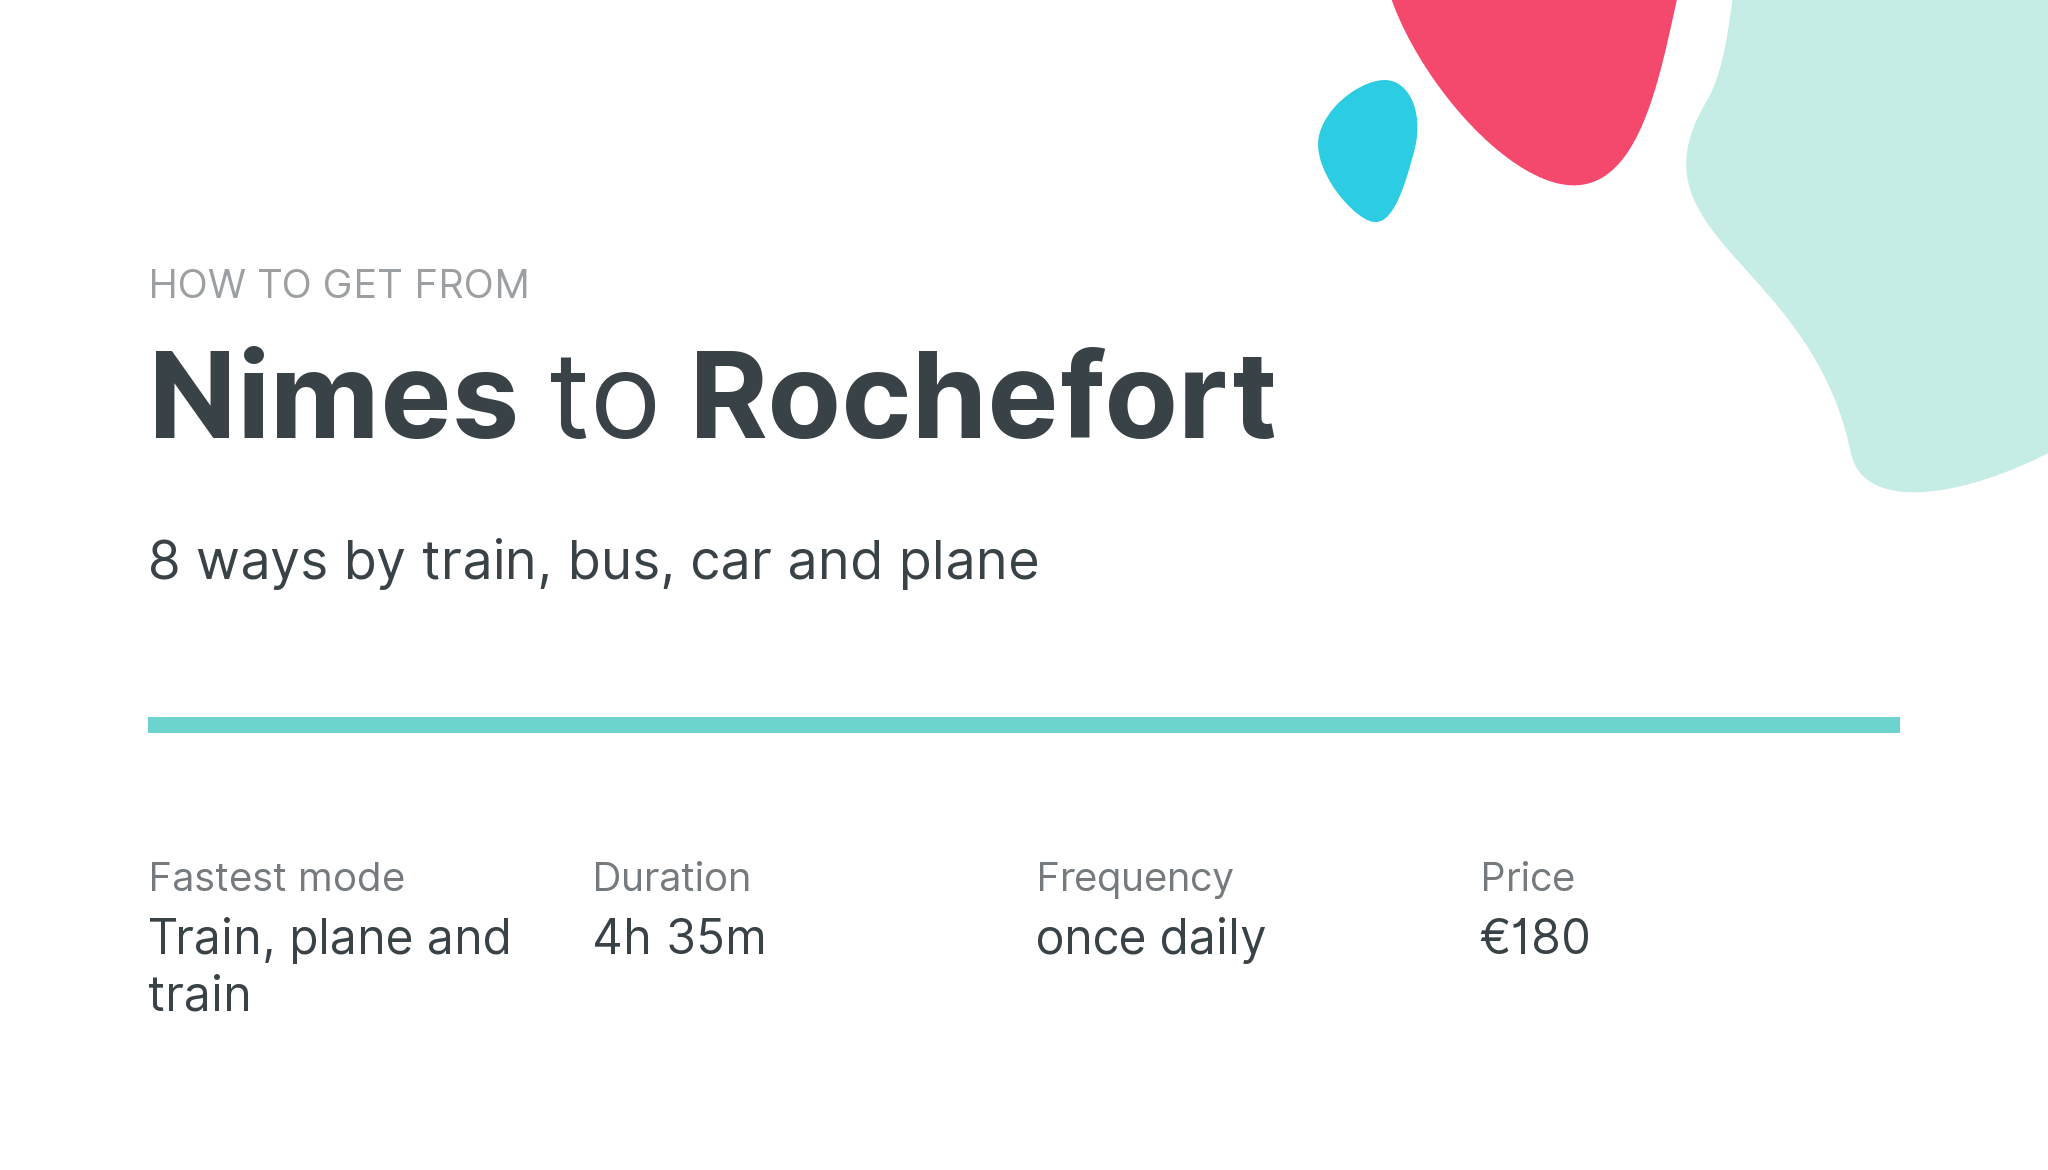 How do I get from Nimes to Rochefort